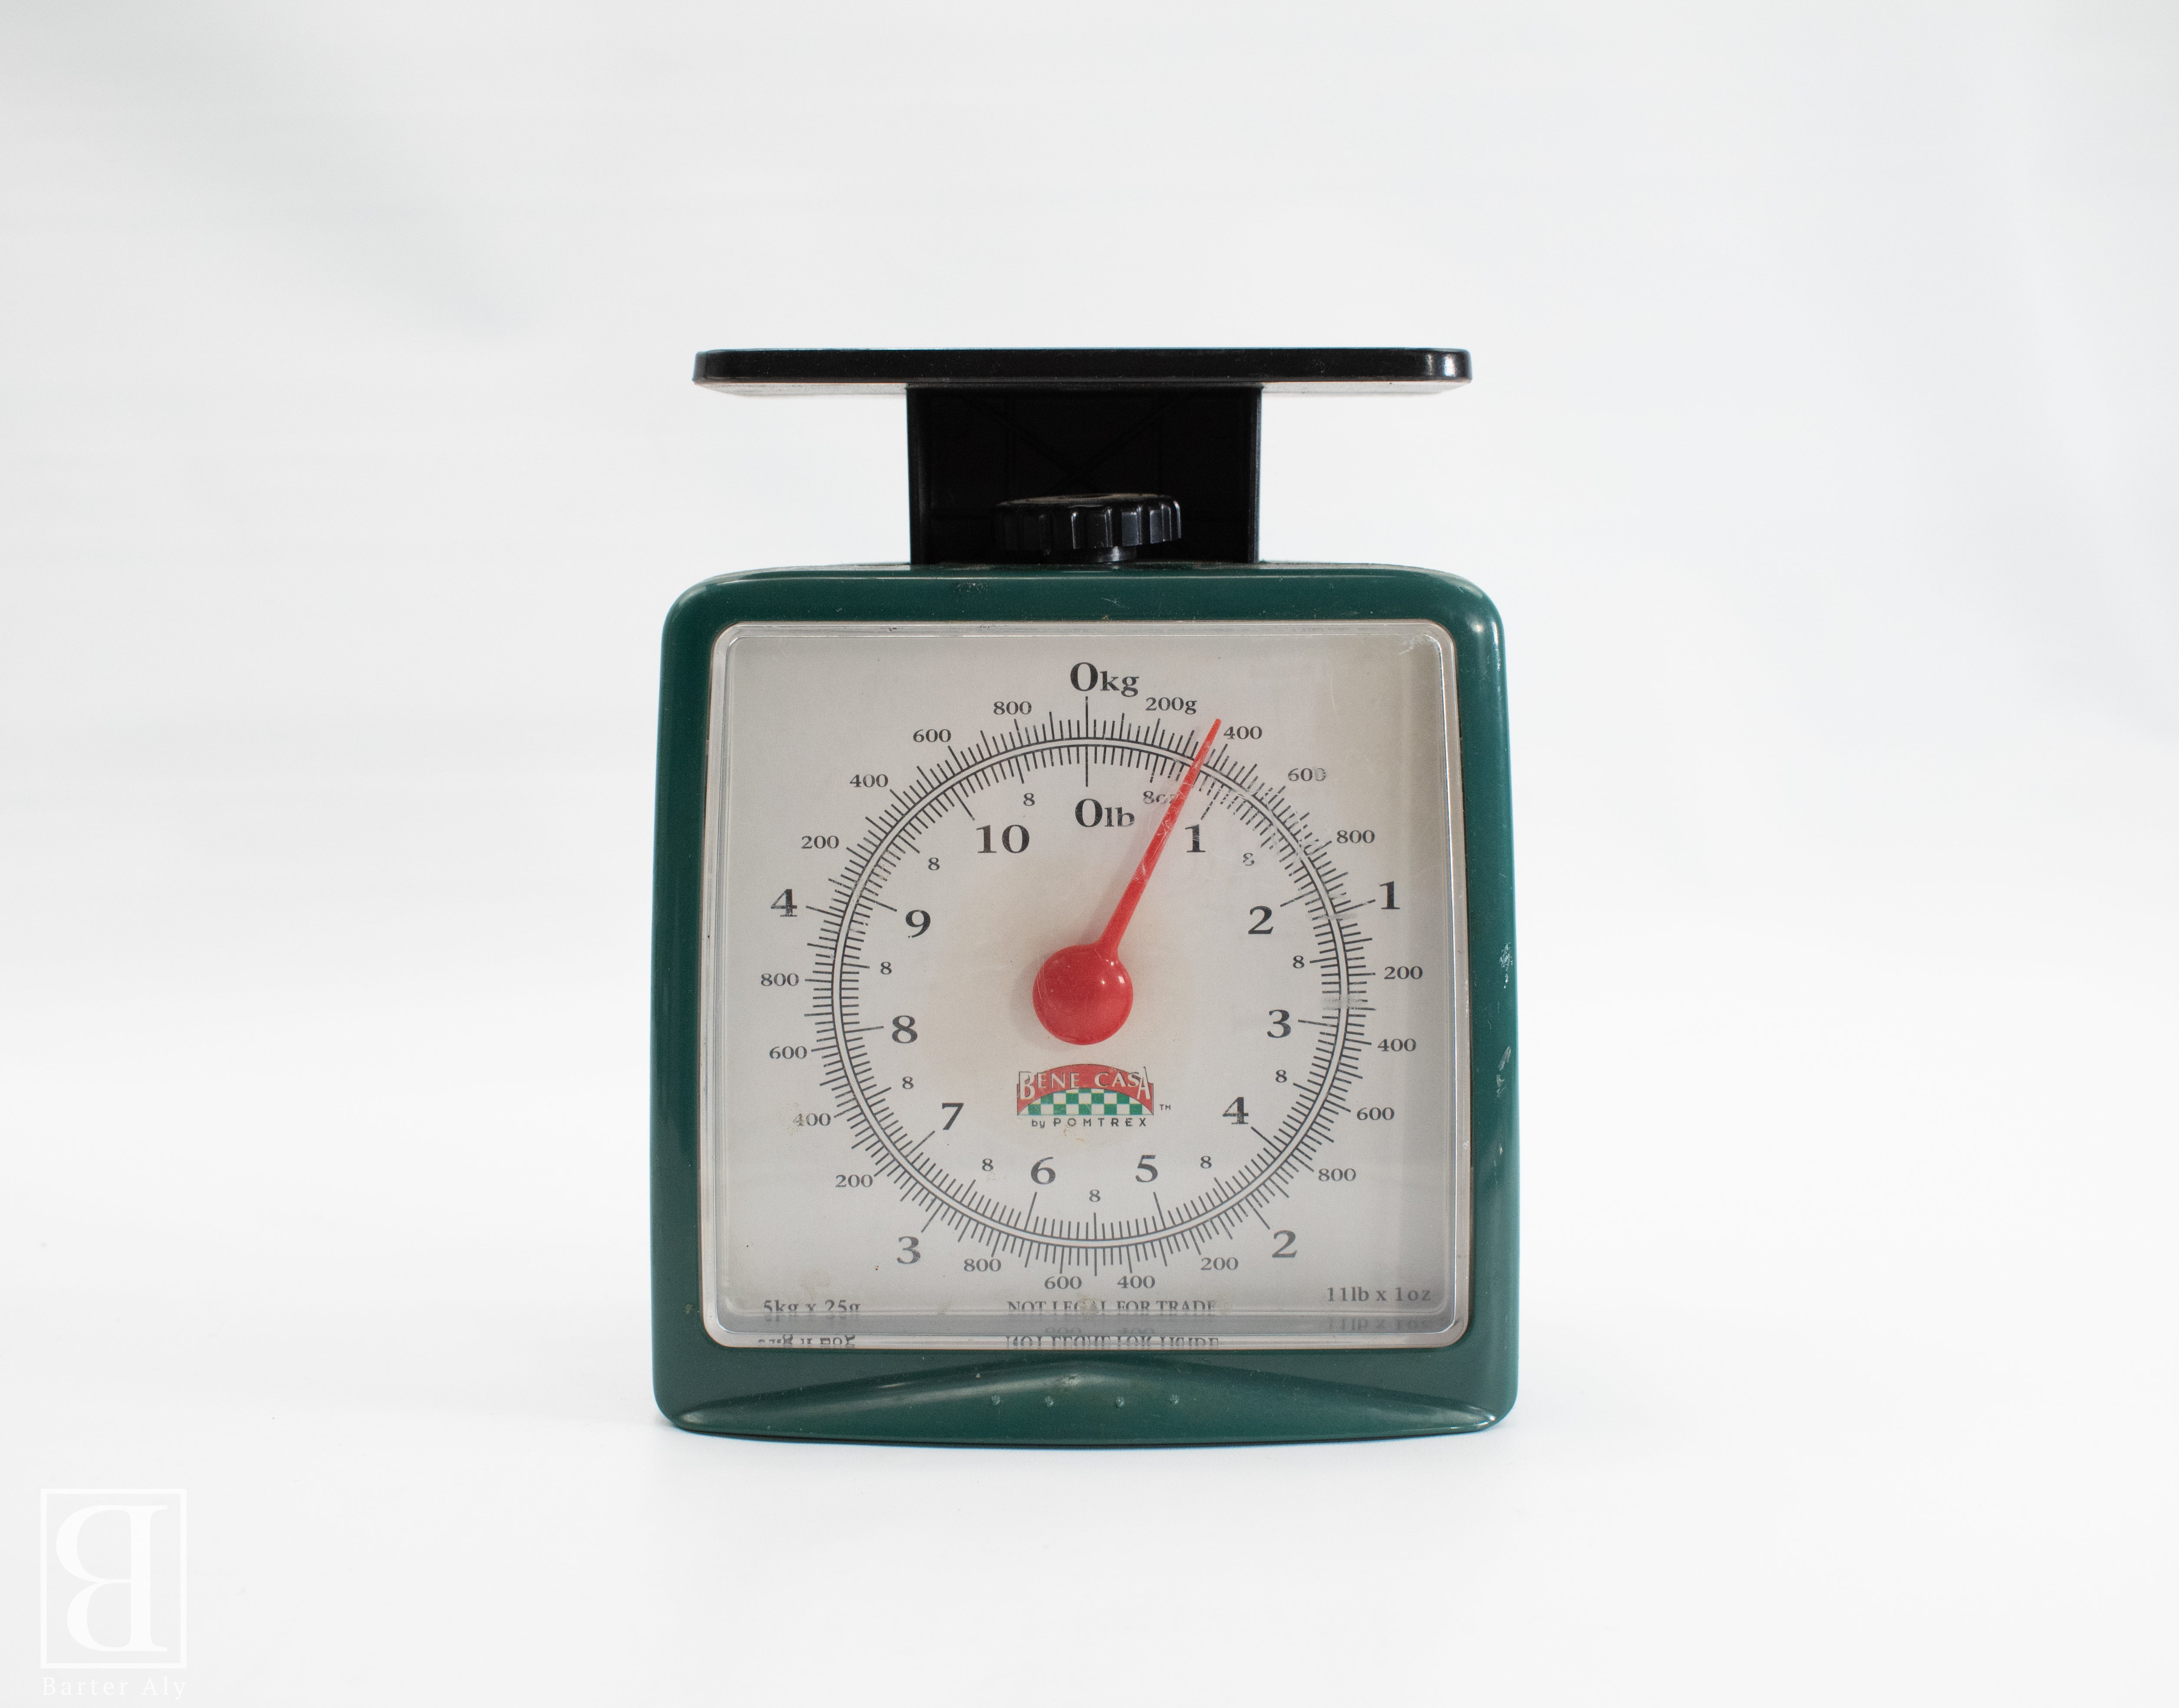 Bene Casa Pomtrex Vintage Scale Used Green Weight Scale